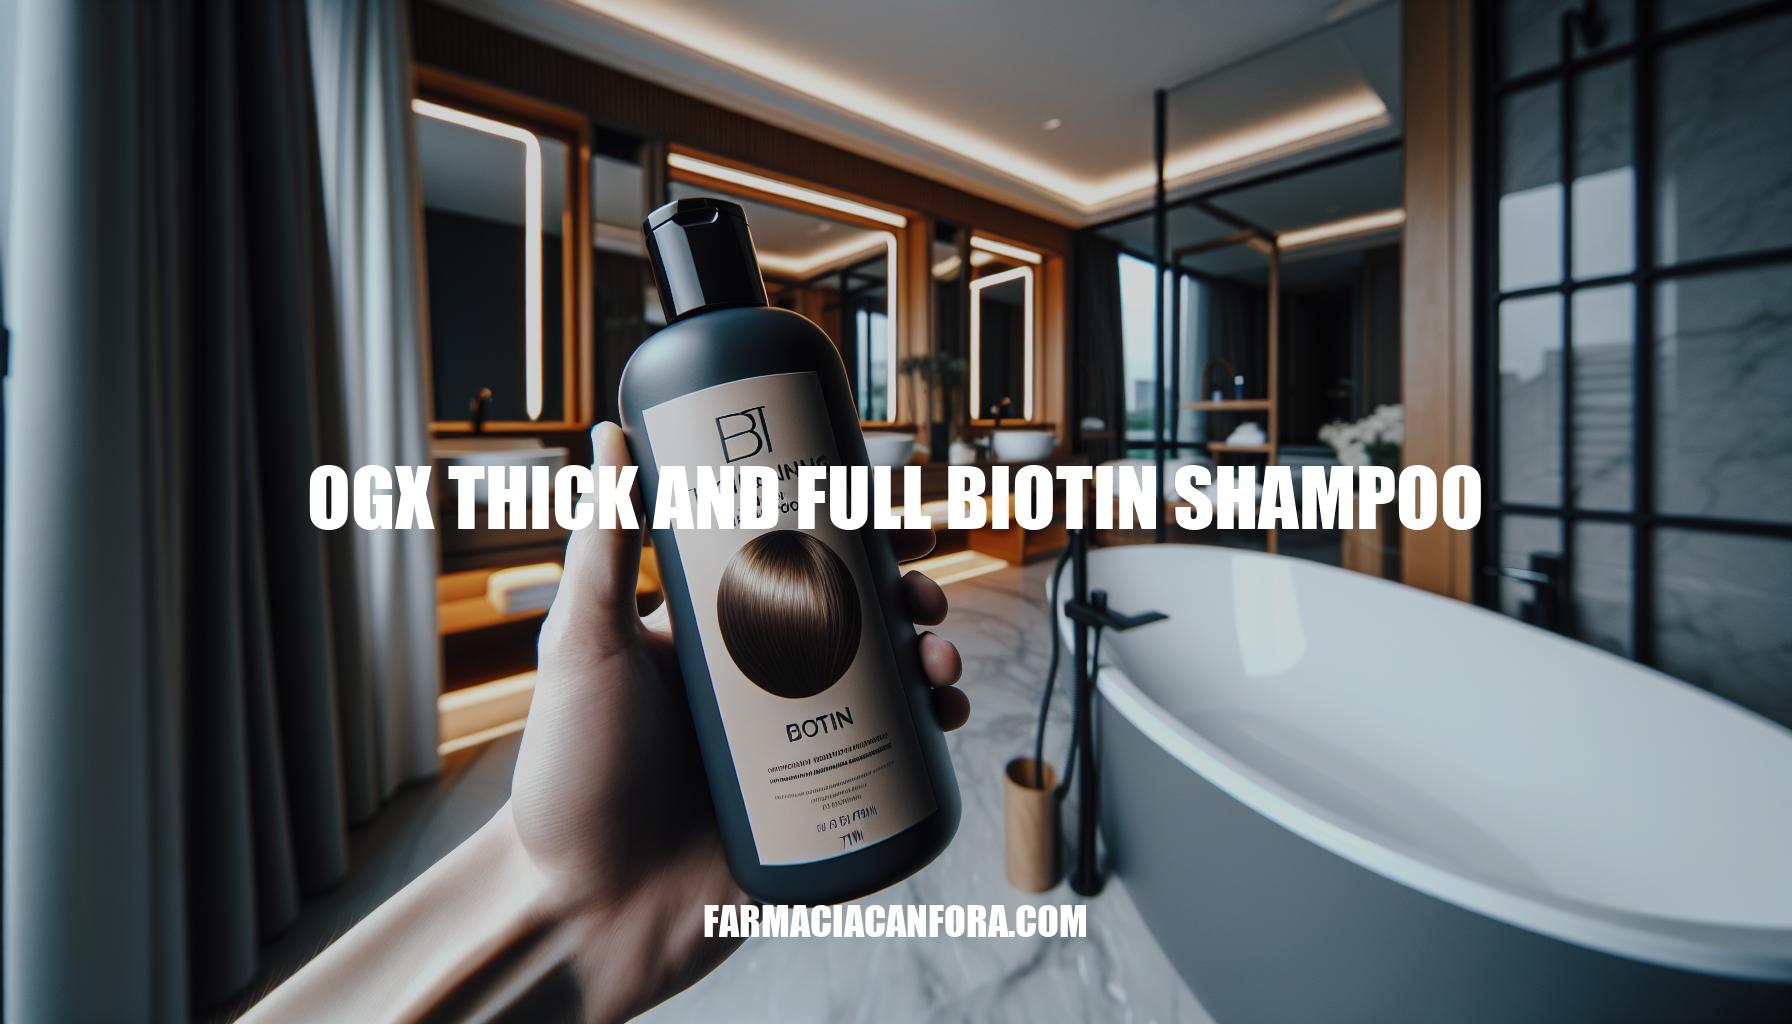 Ultimate Guide to OGX Thick and Full Biotin Shampoo